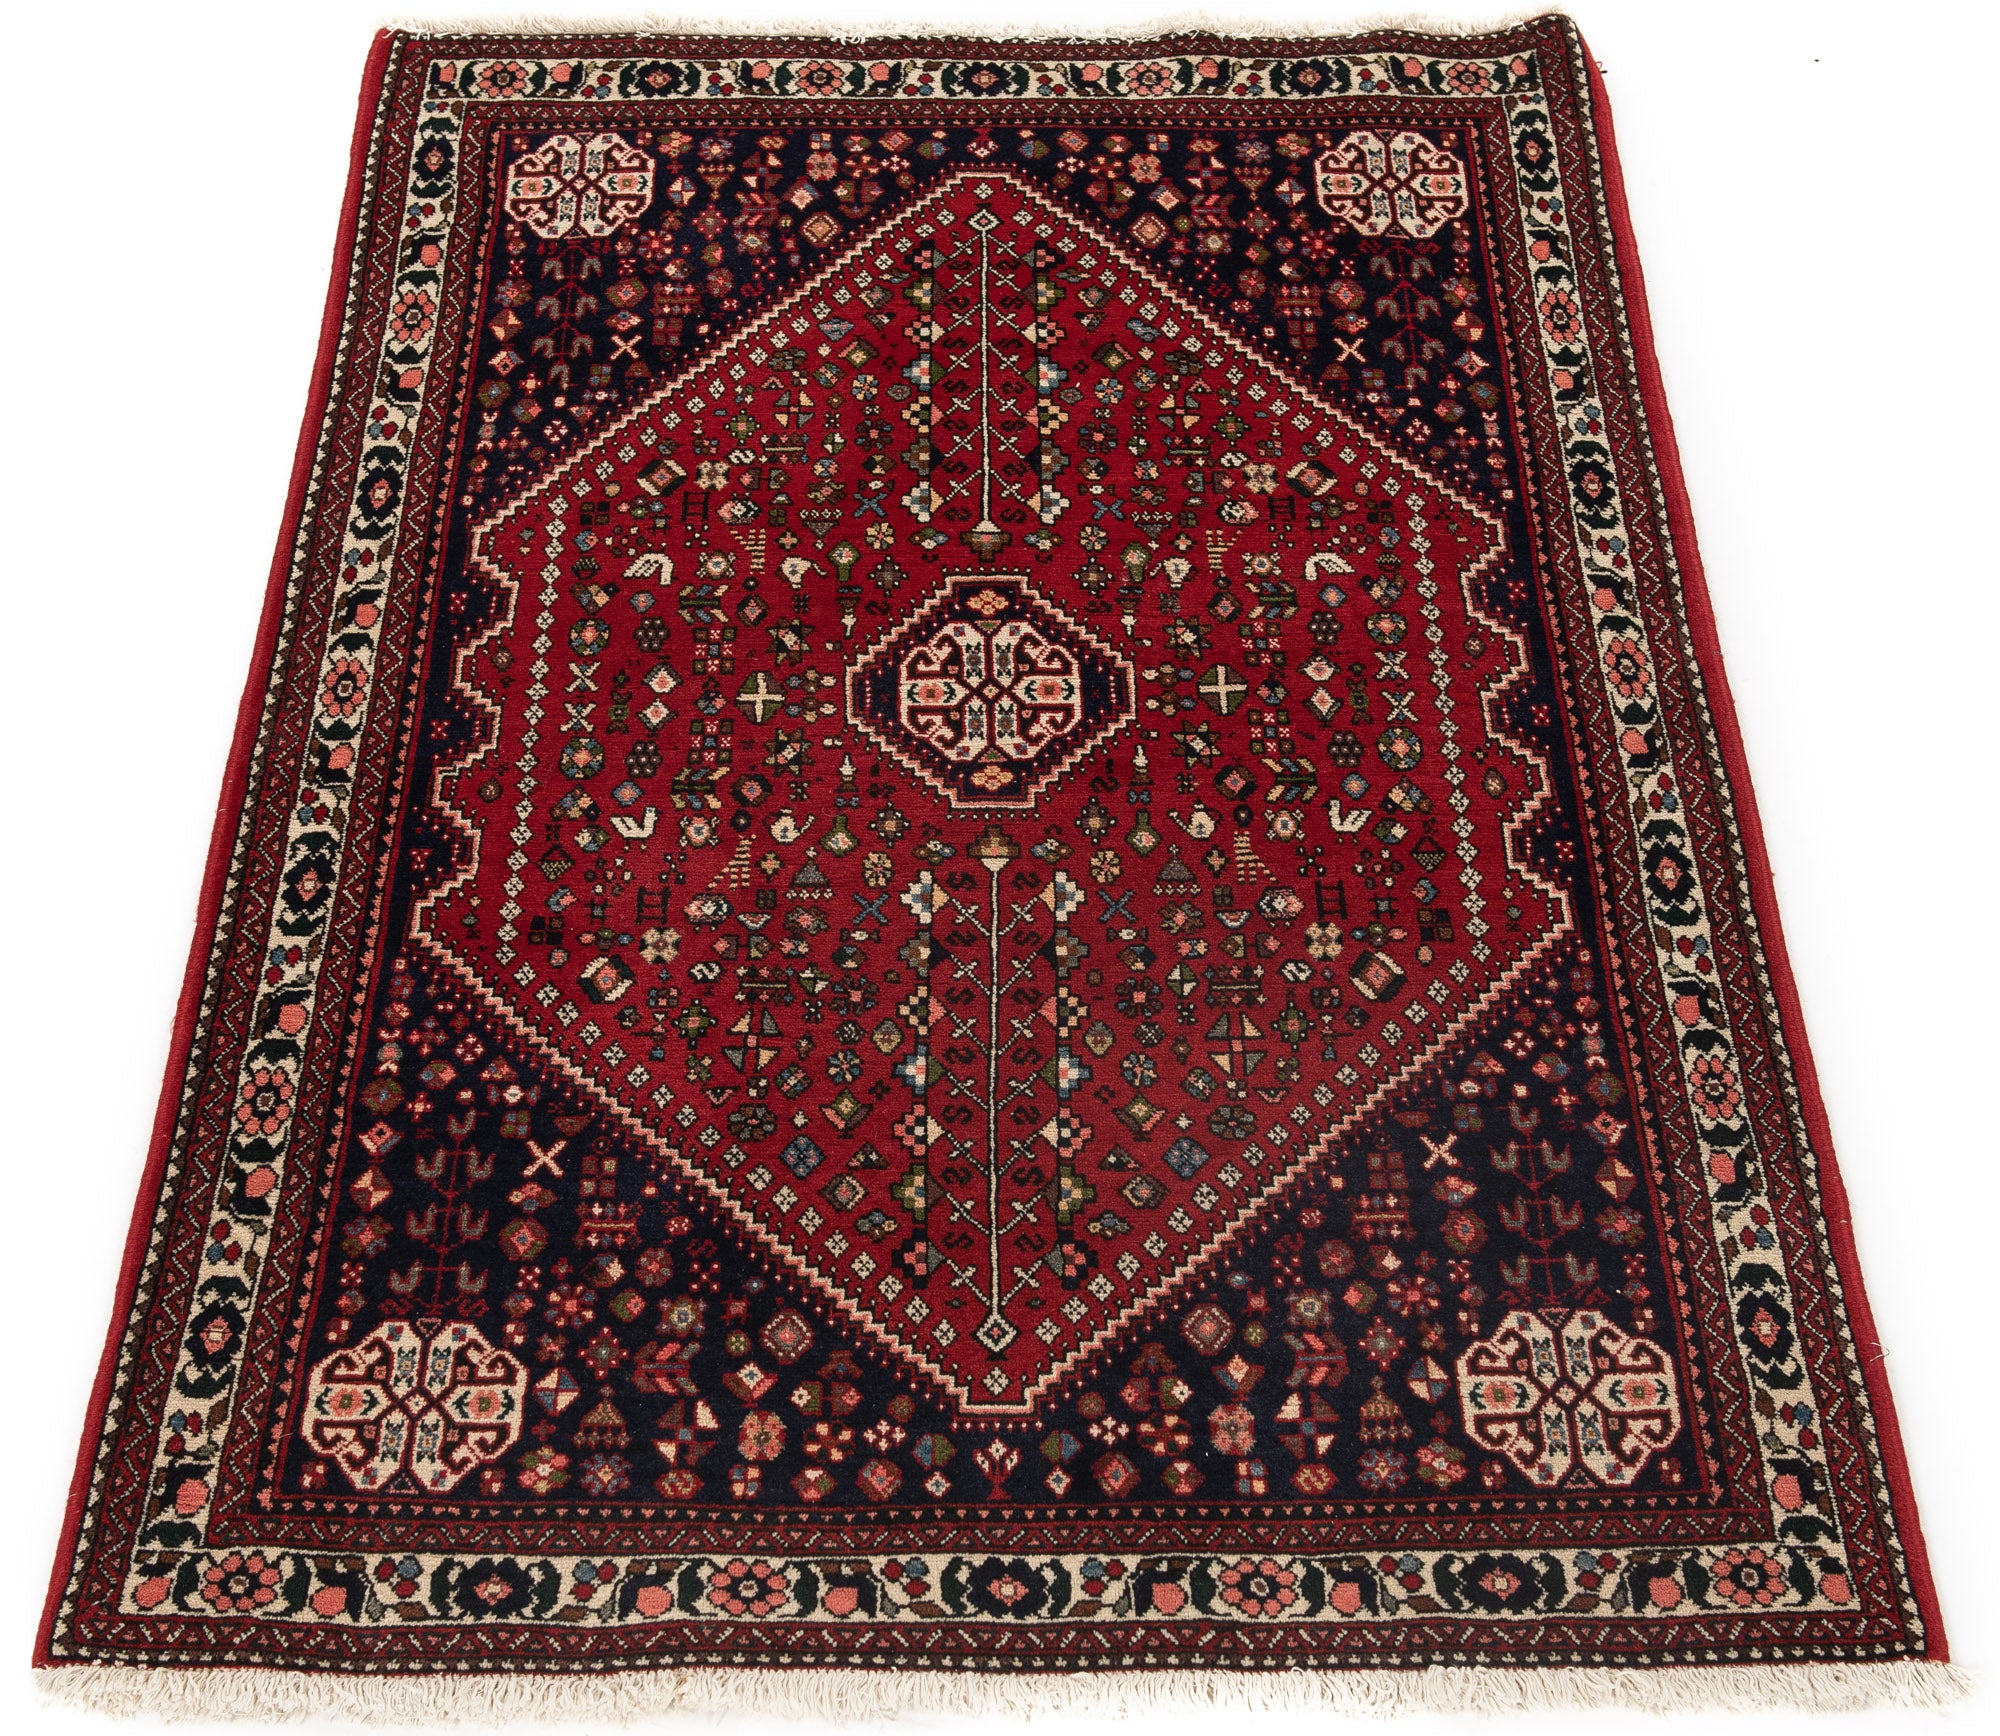 Semi-Antique Persian Abadeh Rug <br> 3'5 x 5'1